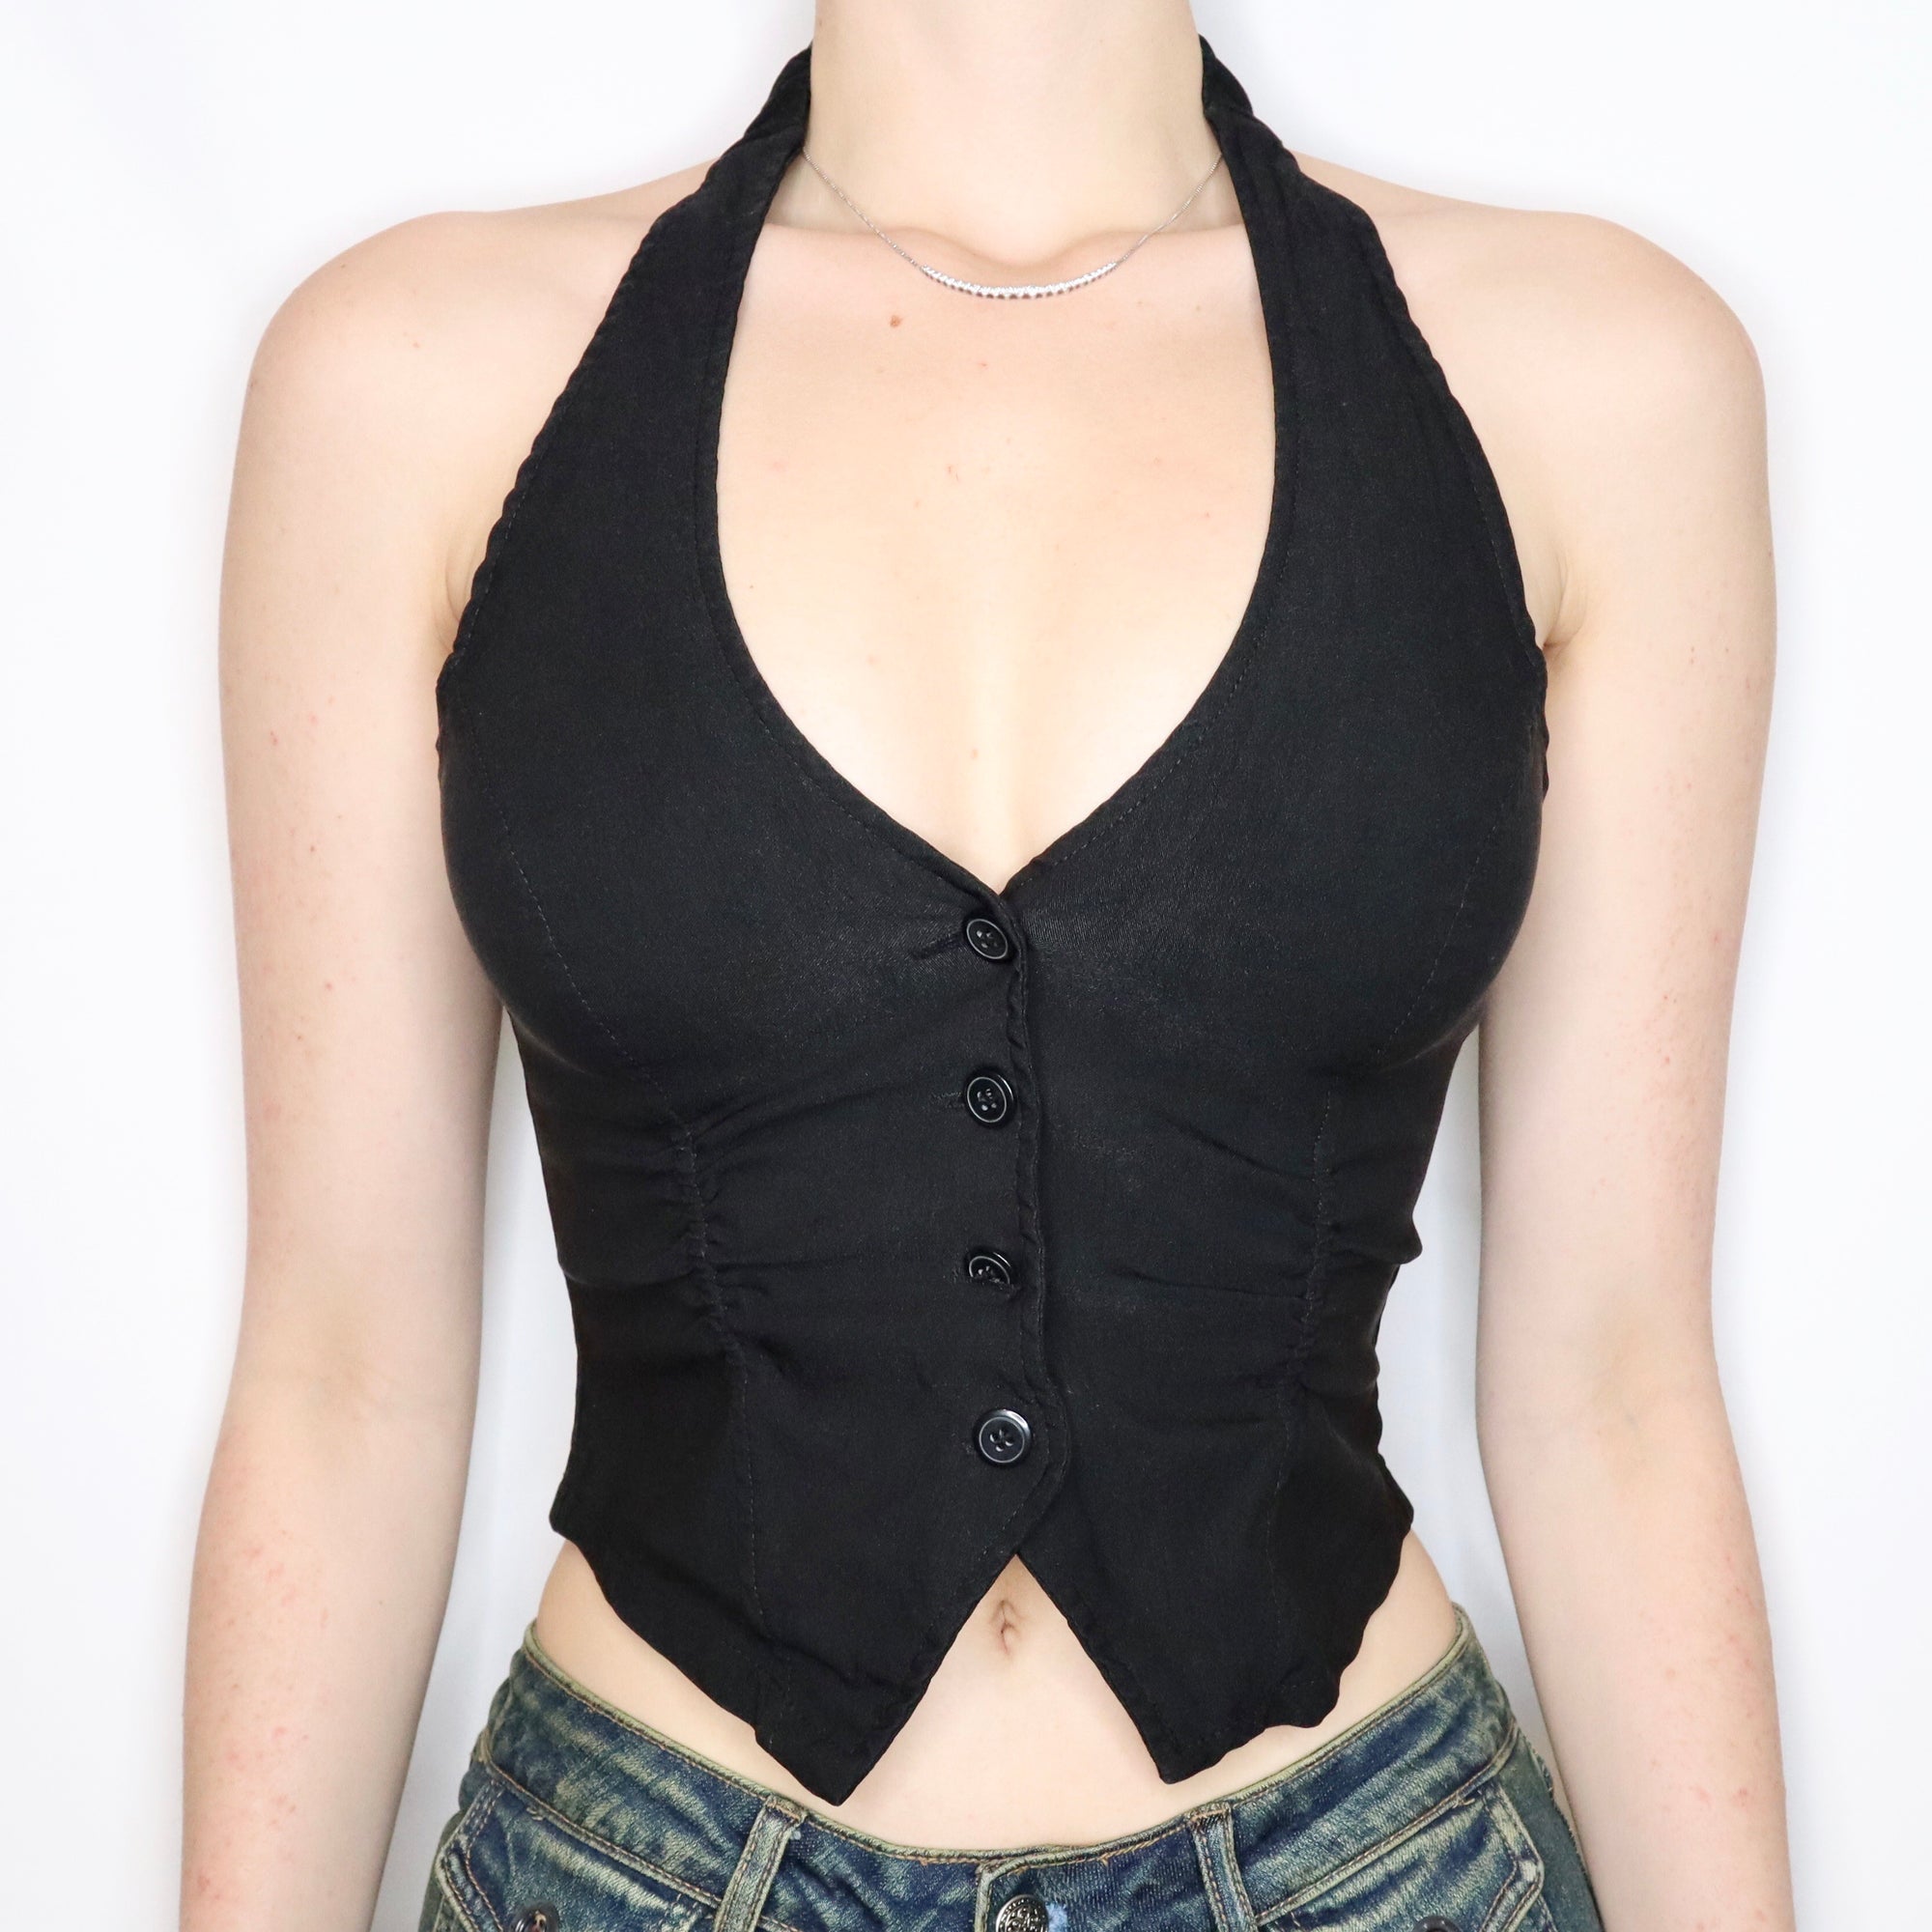 Vintage Early 2000s Stretchy Black Waistcoat Halter Top